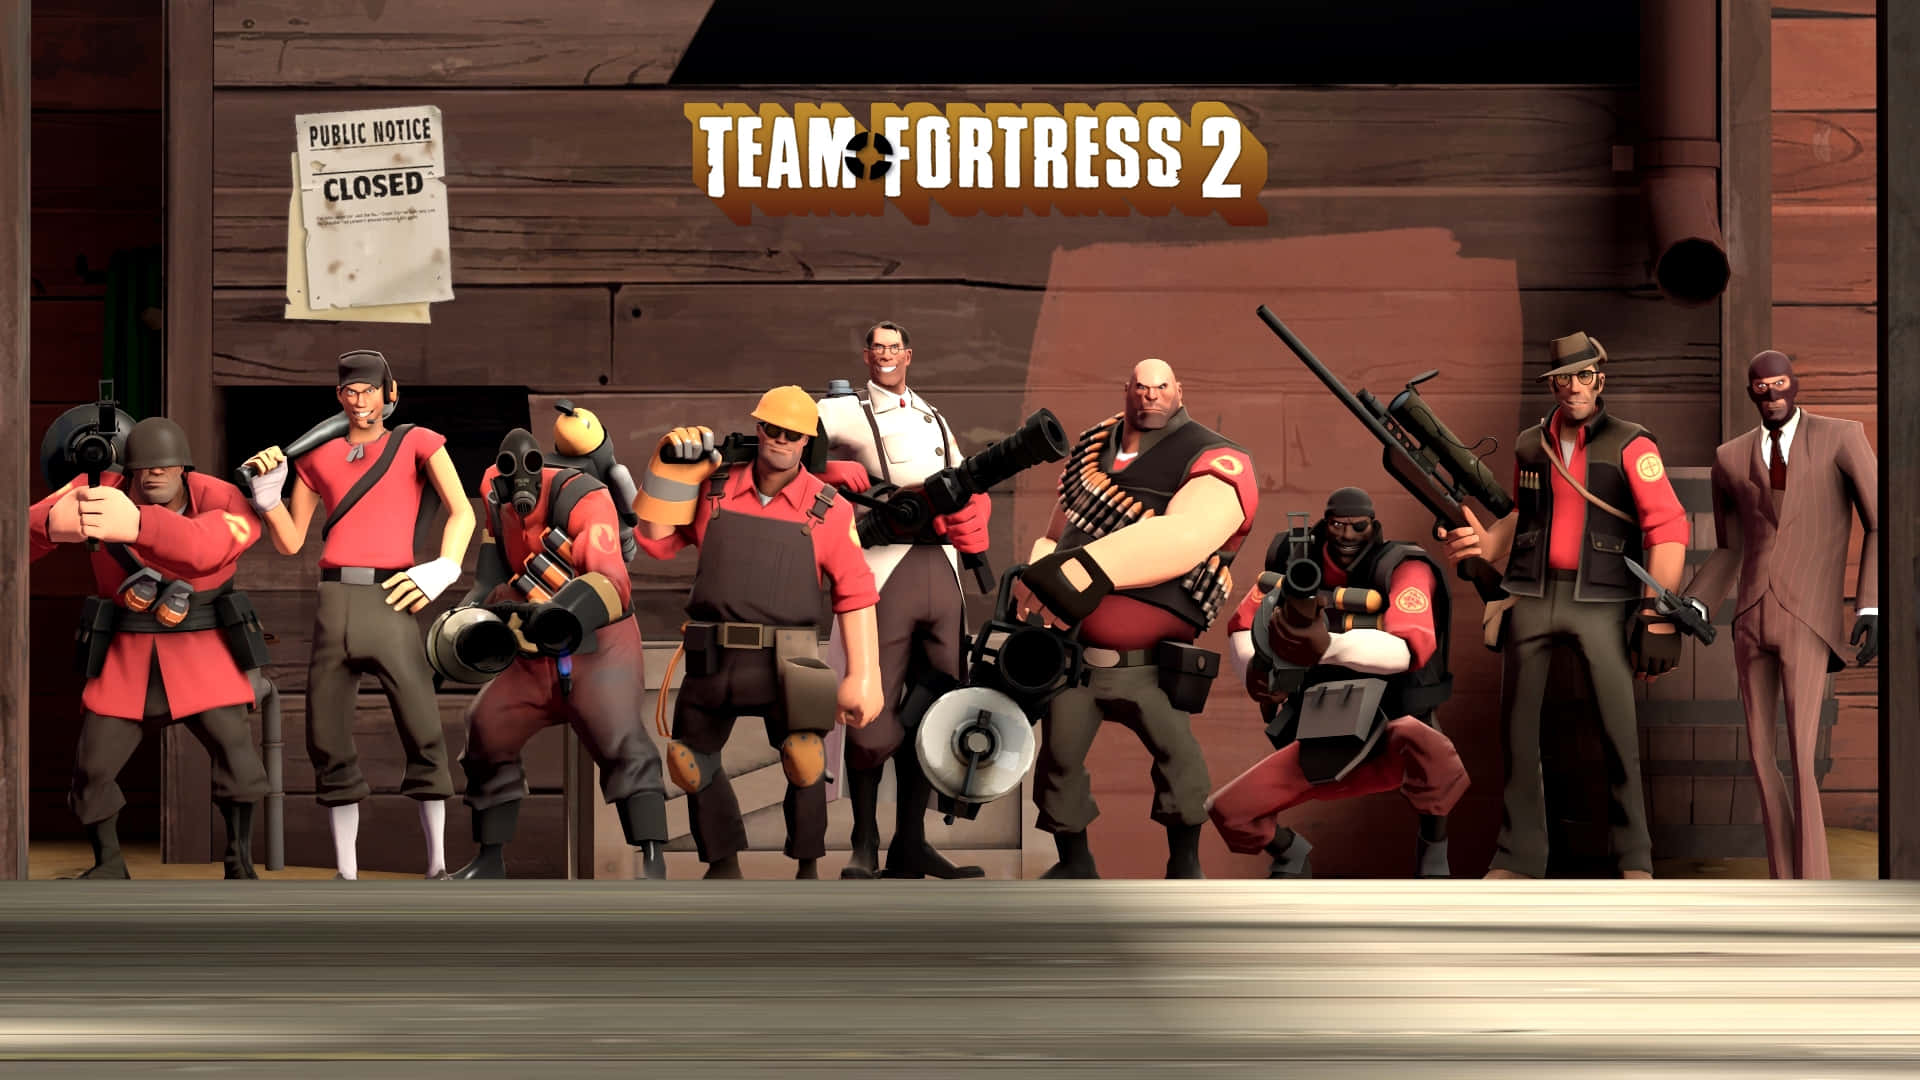 Unlock new challenges and weapons in Team Fortress 2.